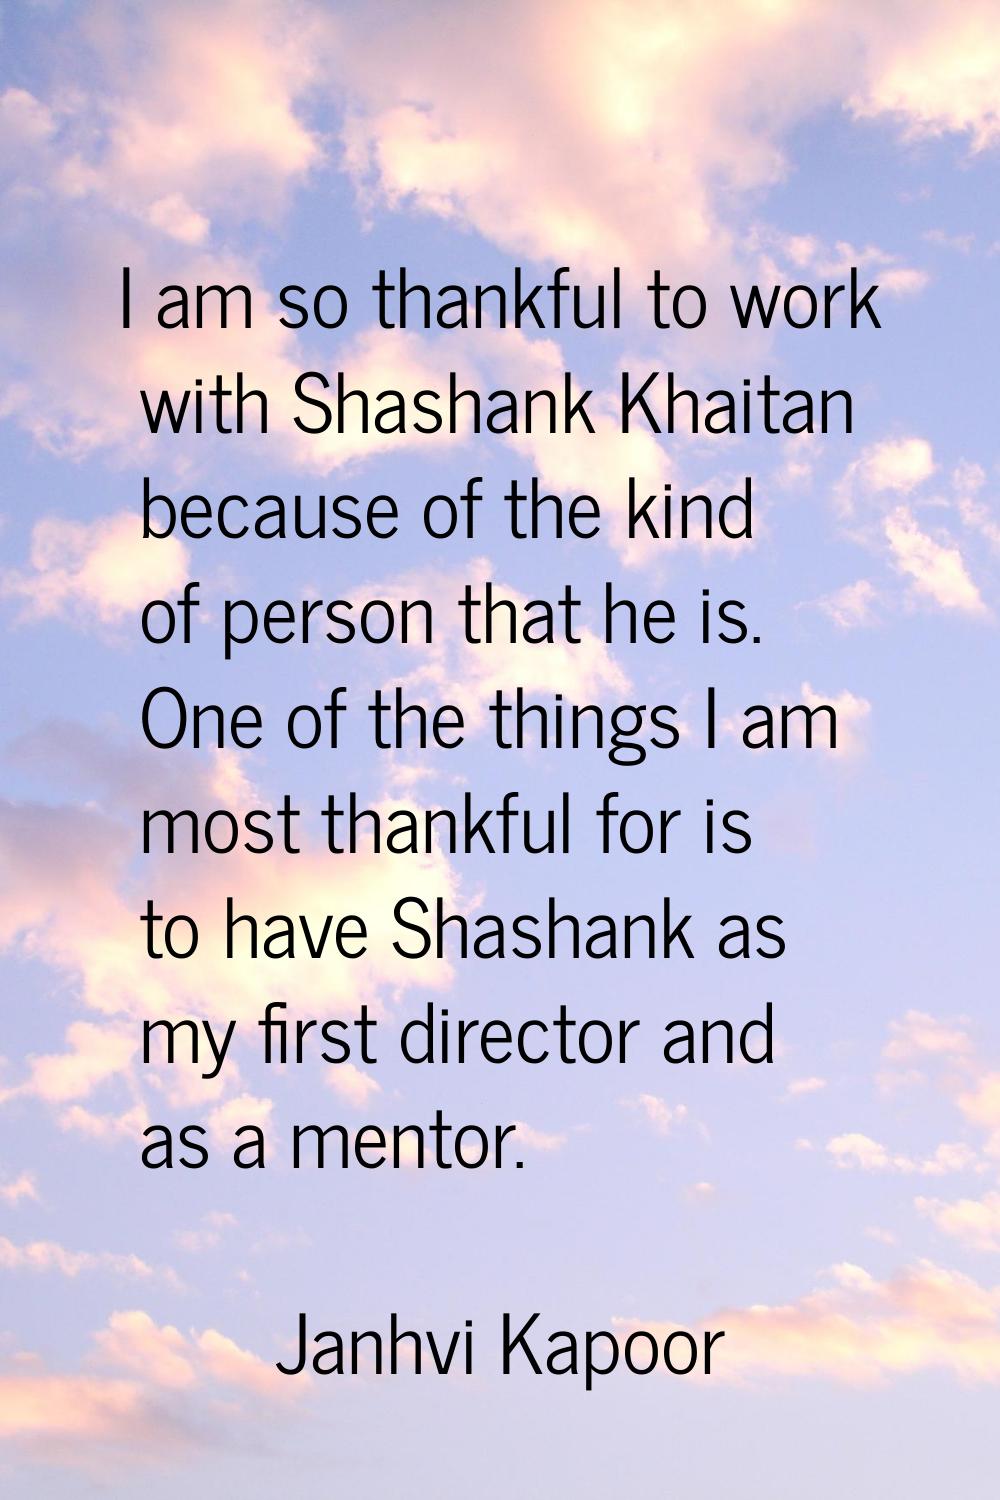 I am so thankful to work with Shashank Khaitan because of the kind of person that he is. One of the